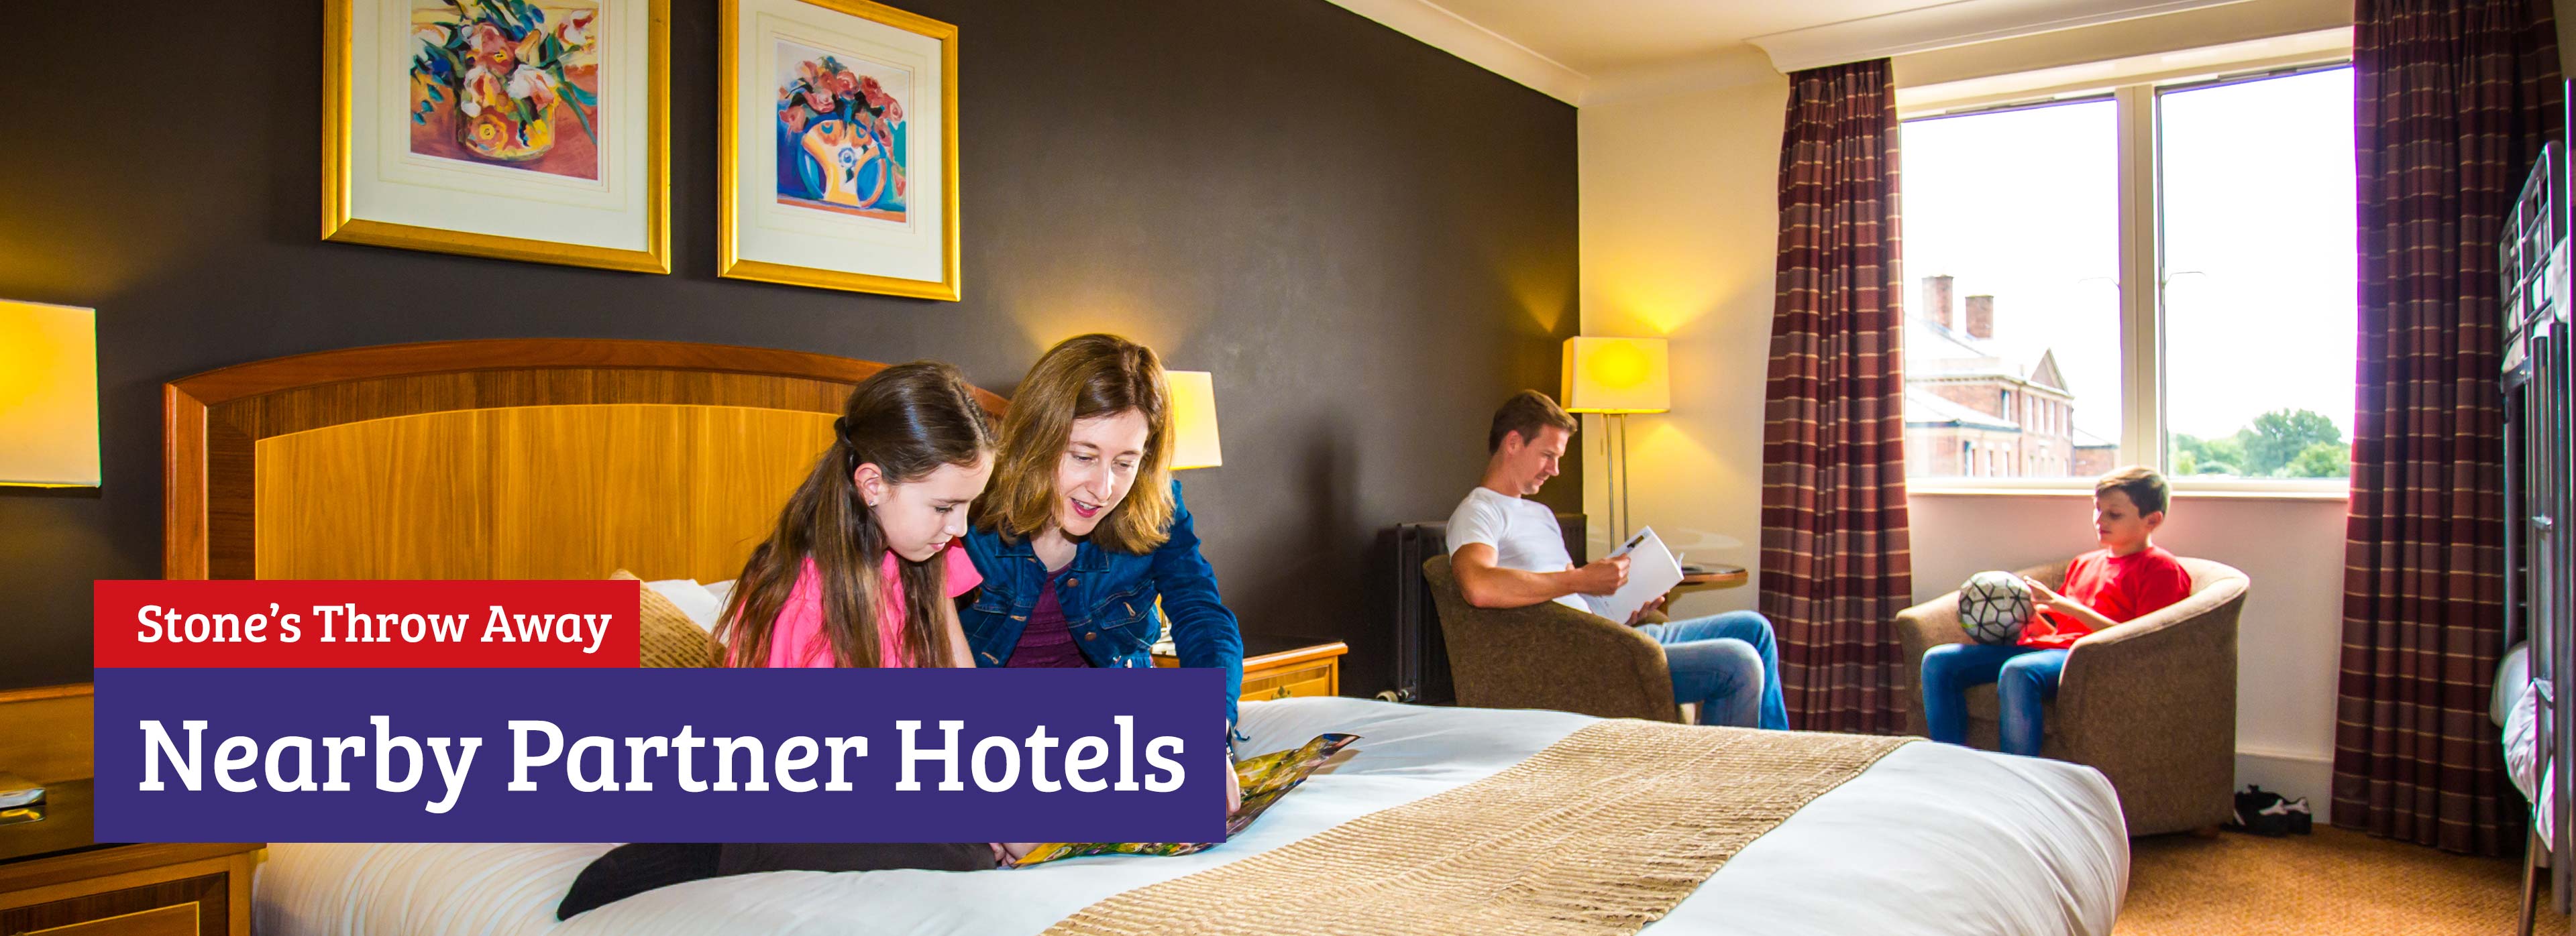 Nearby partner hotels with Alton Towers Holidays